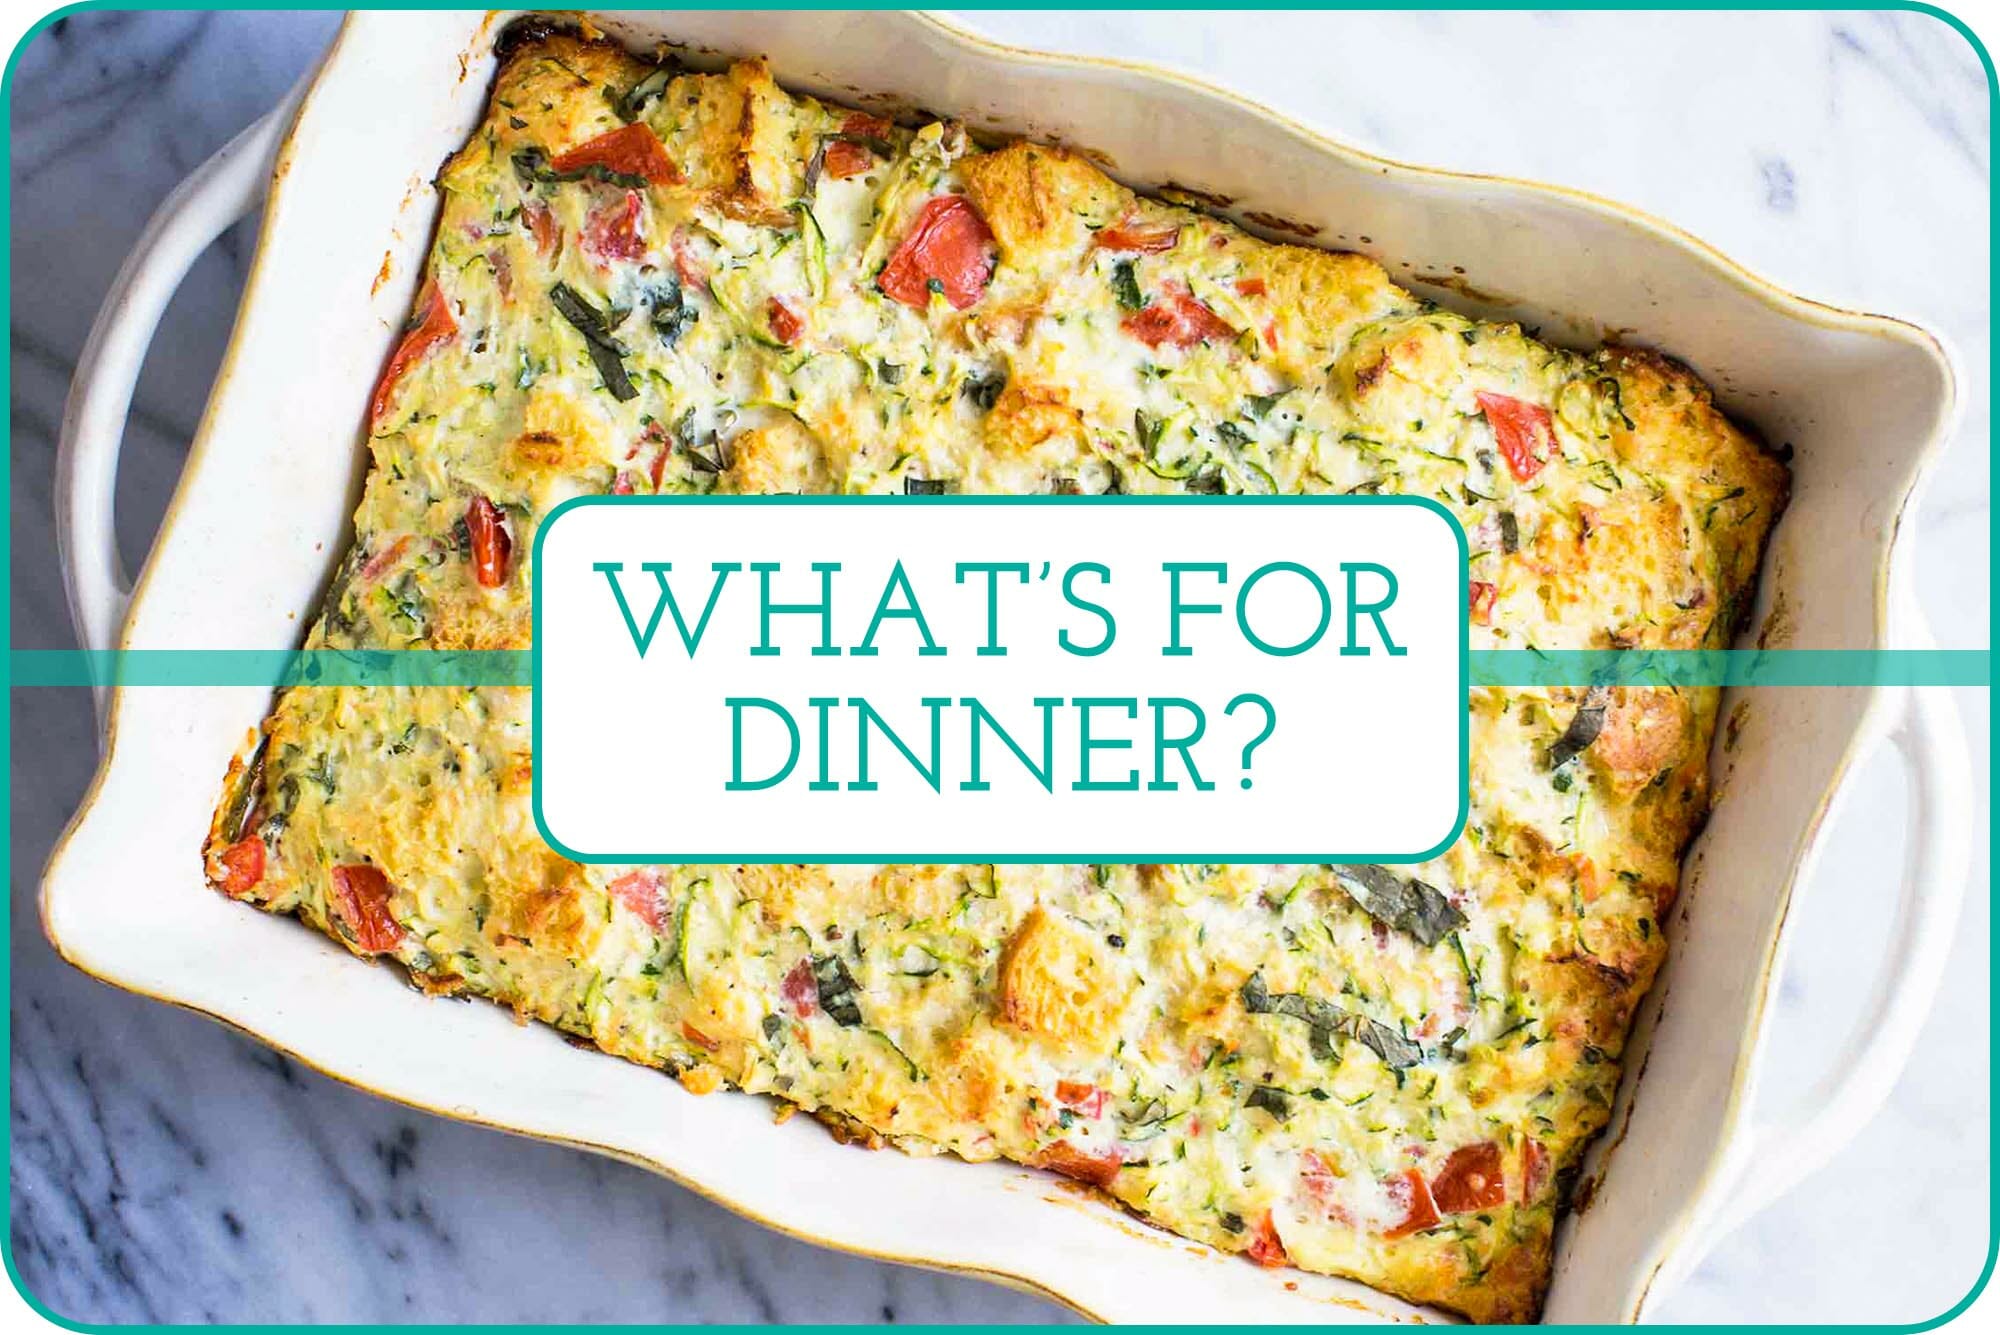 "What's for Dinner" captioned over Zucchini Breakfast Casserole.